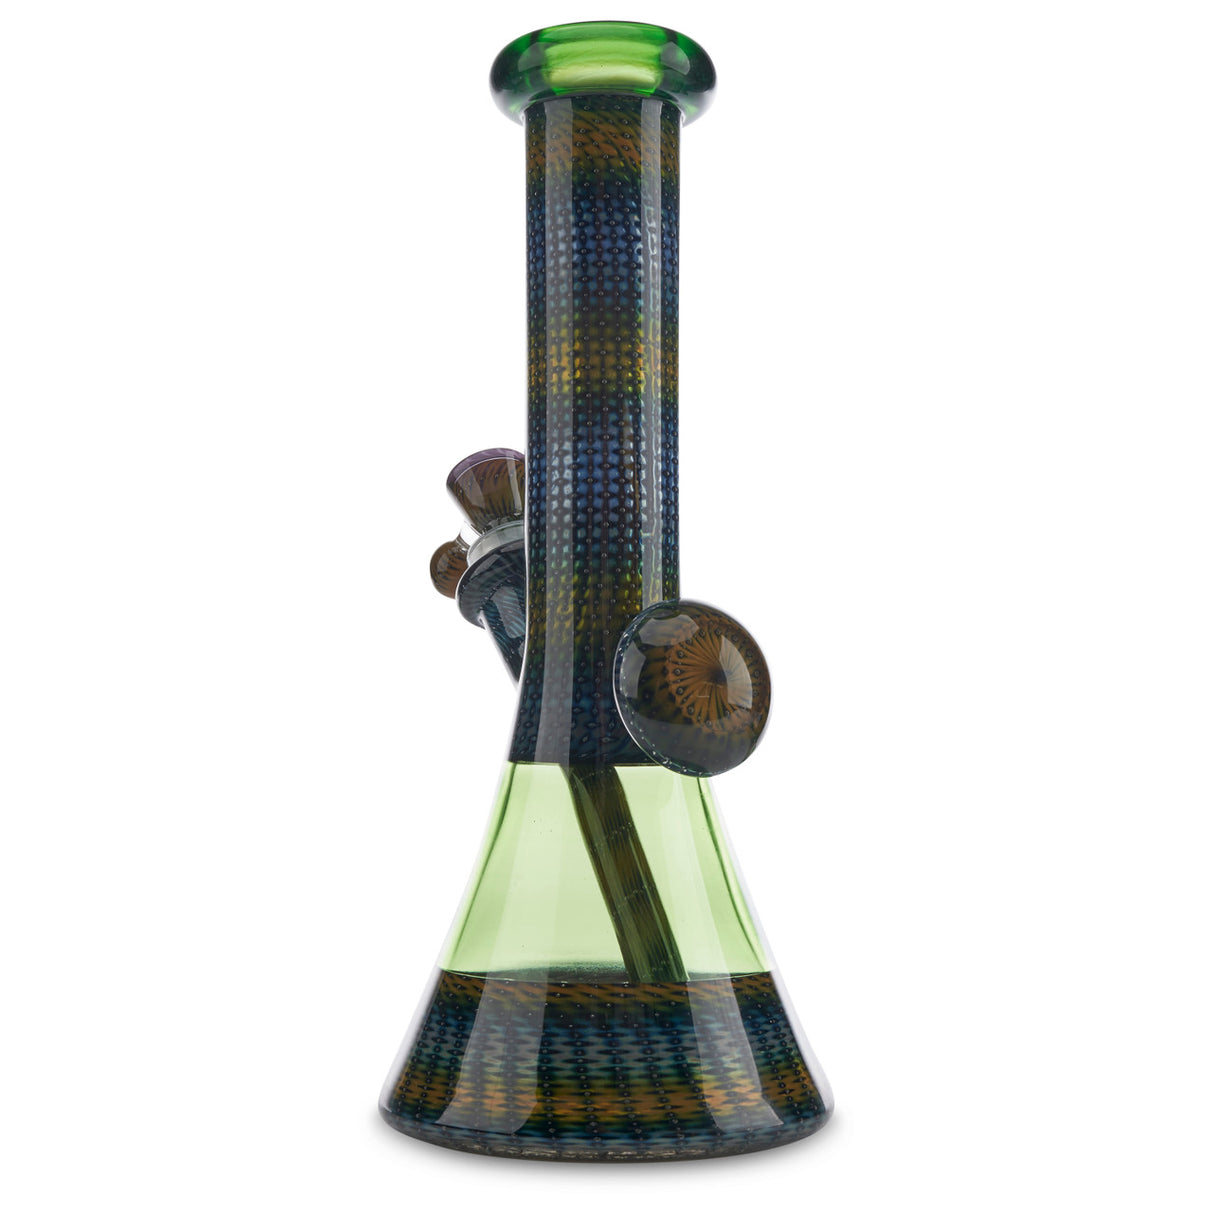 steve sizelove glass mini tube for smoking dry herbs and tobacco